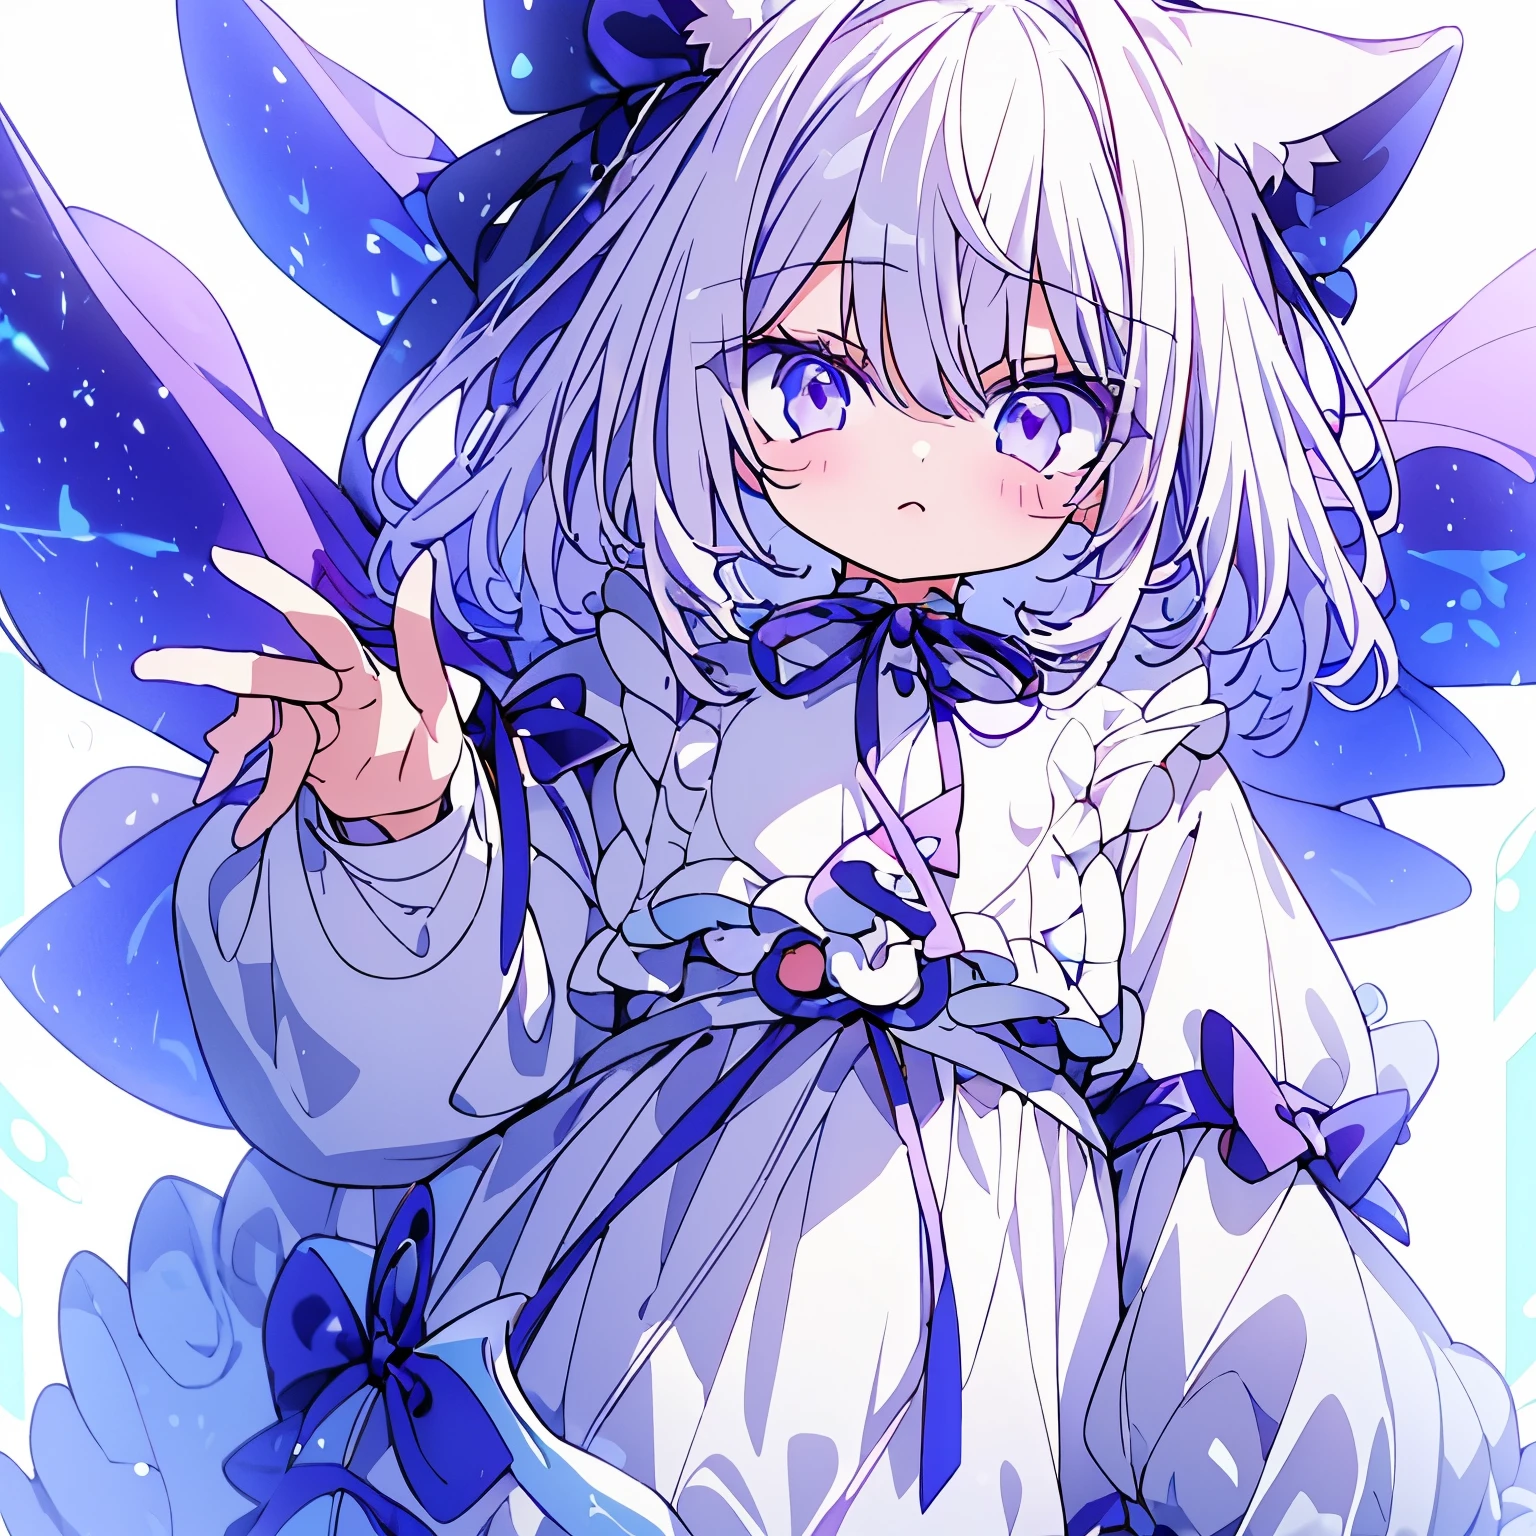 A 3'6 smol catgirl kid with white hair and violet eyes. The white hair has a small hint of violet in it too. She is very cute and usually has a happy expression. She wears a white hoodie that is oversized. She is around 5 years old too.